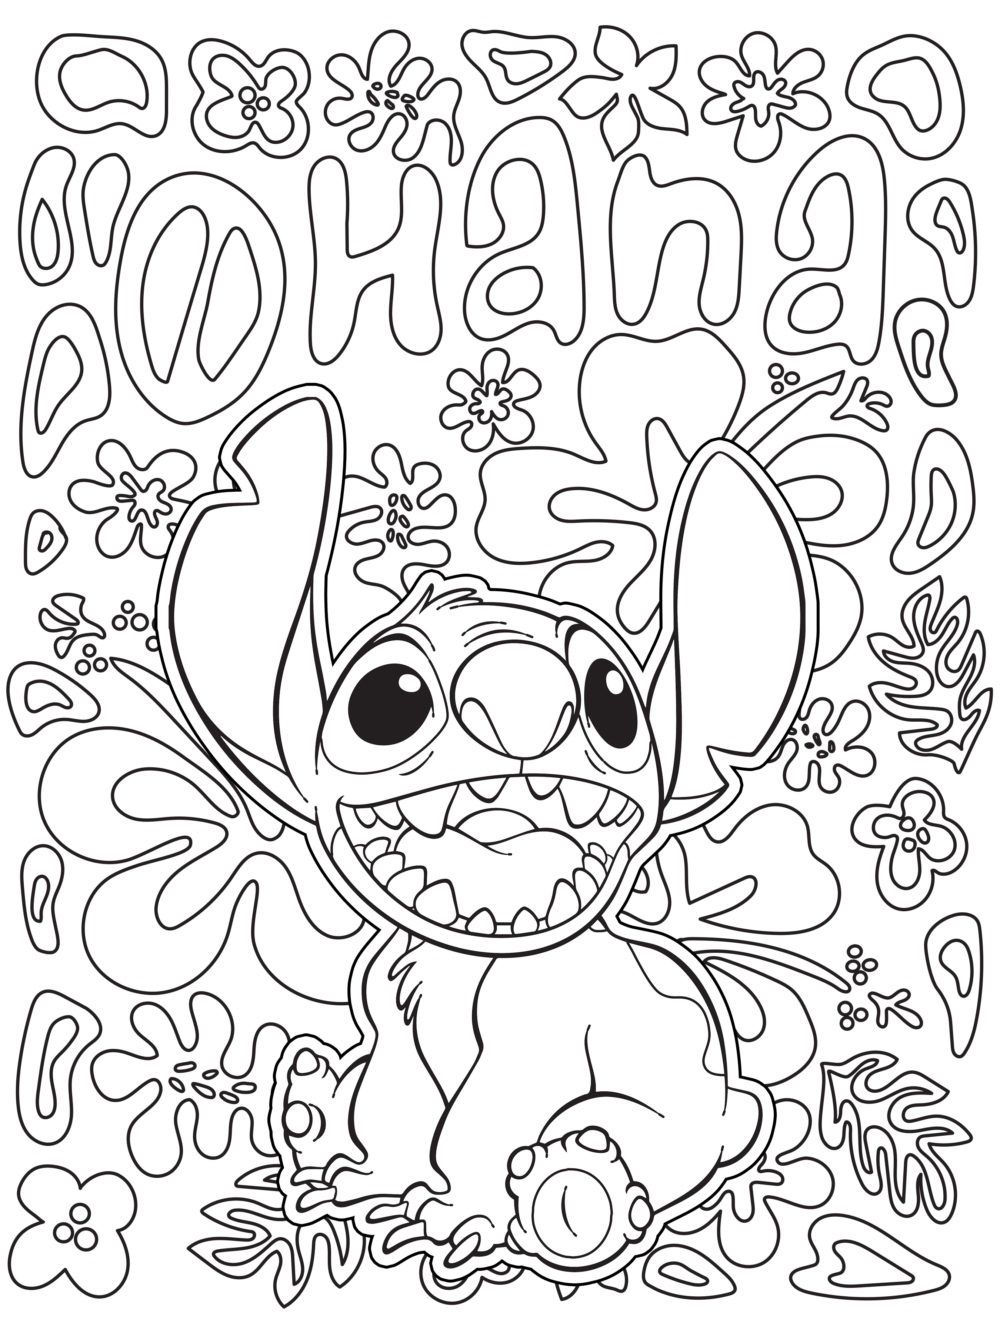 25+ Inspired Picture Of Stress Relief Coloring Pages . Stress